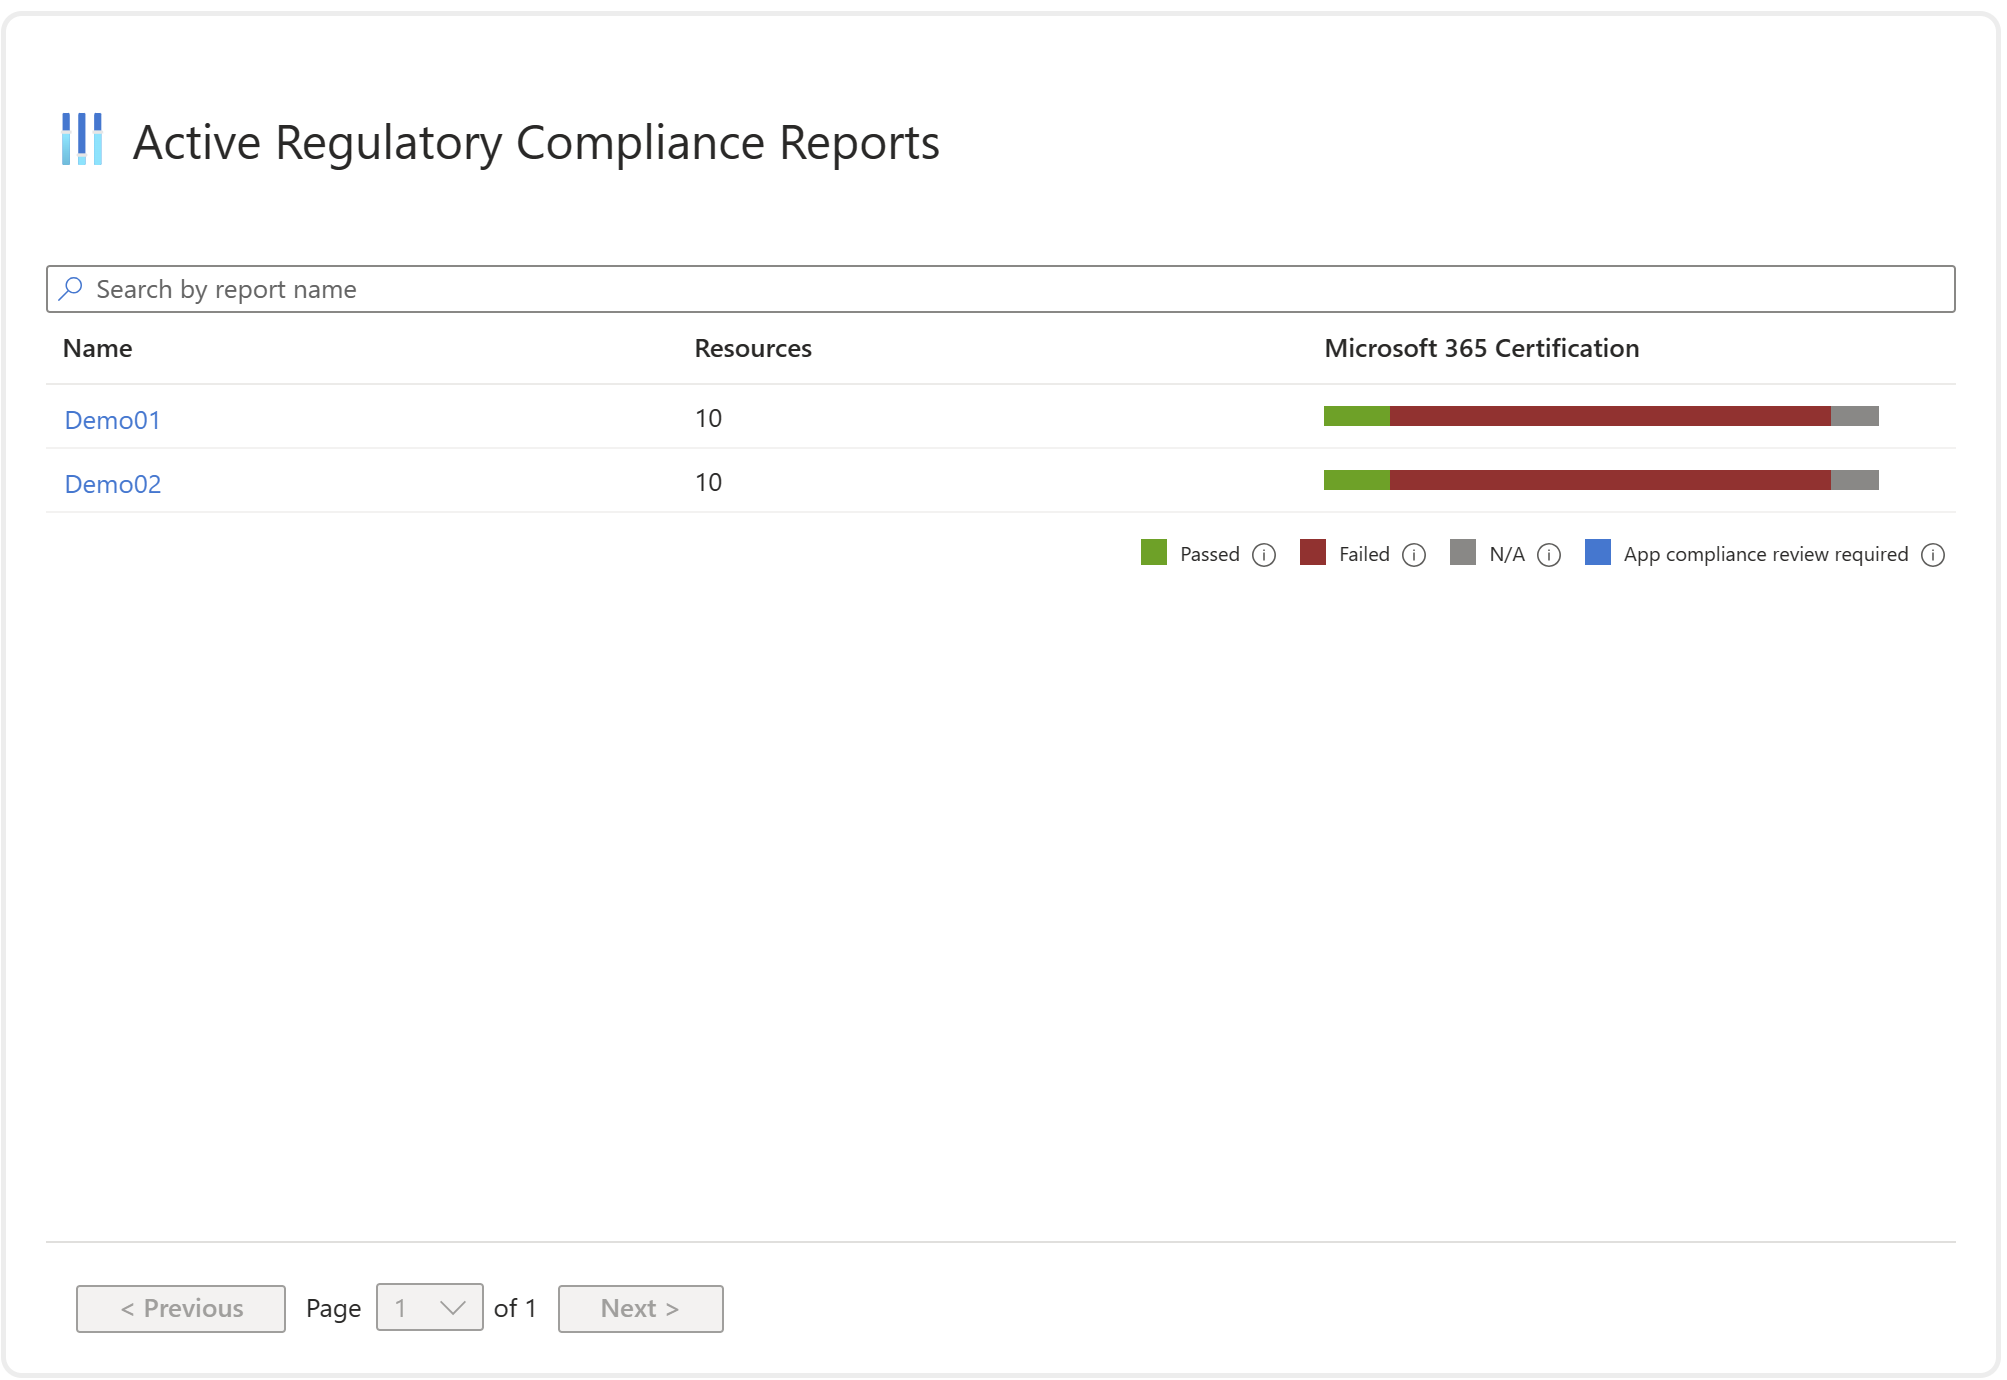 Overview of compliance status